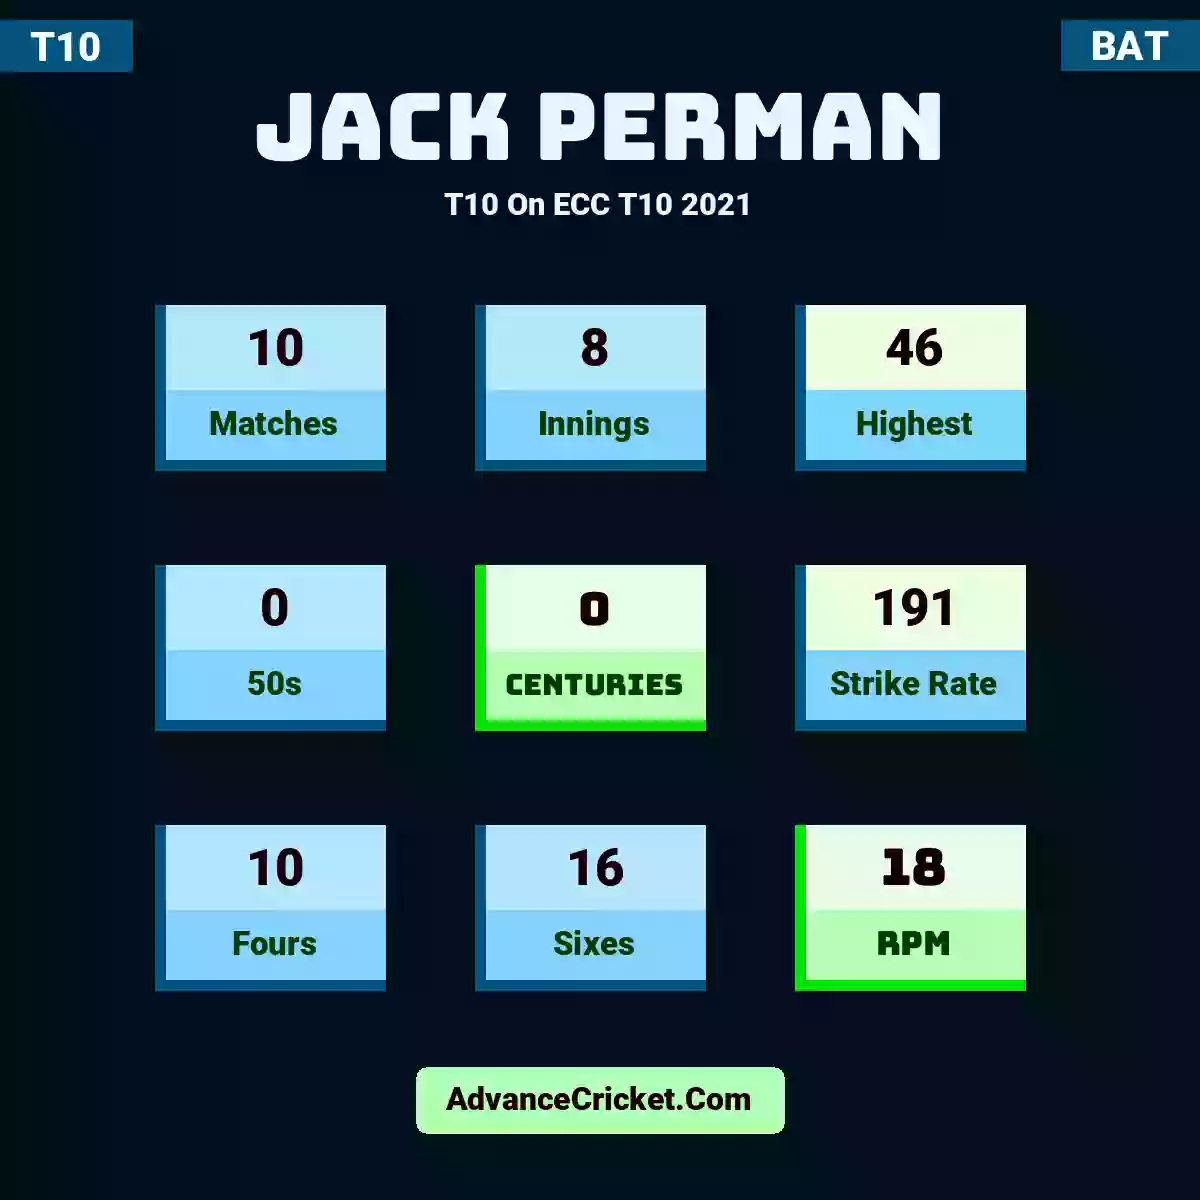 Jack Perman T10  On ECC T10 2021, Jack Perman played 10 matches, scored 46 runs as highest, 0 half-centuries, and 0 centuries, with a strike rate of 191. J.Perman hit 10 fours and 16 sixes, with an RPM of 18.